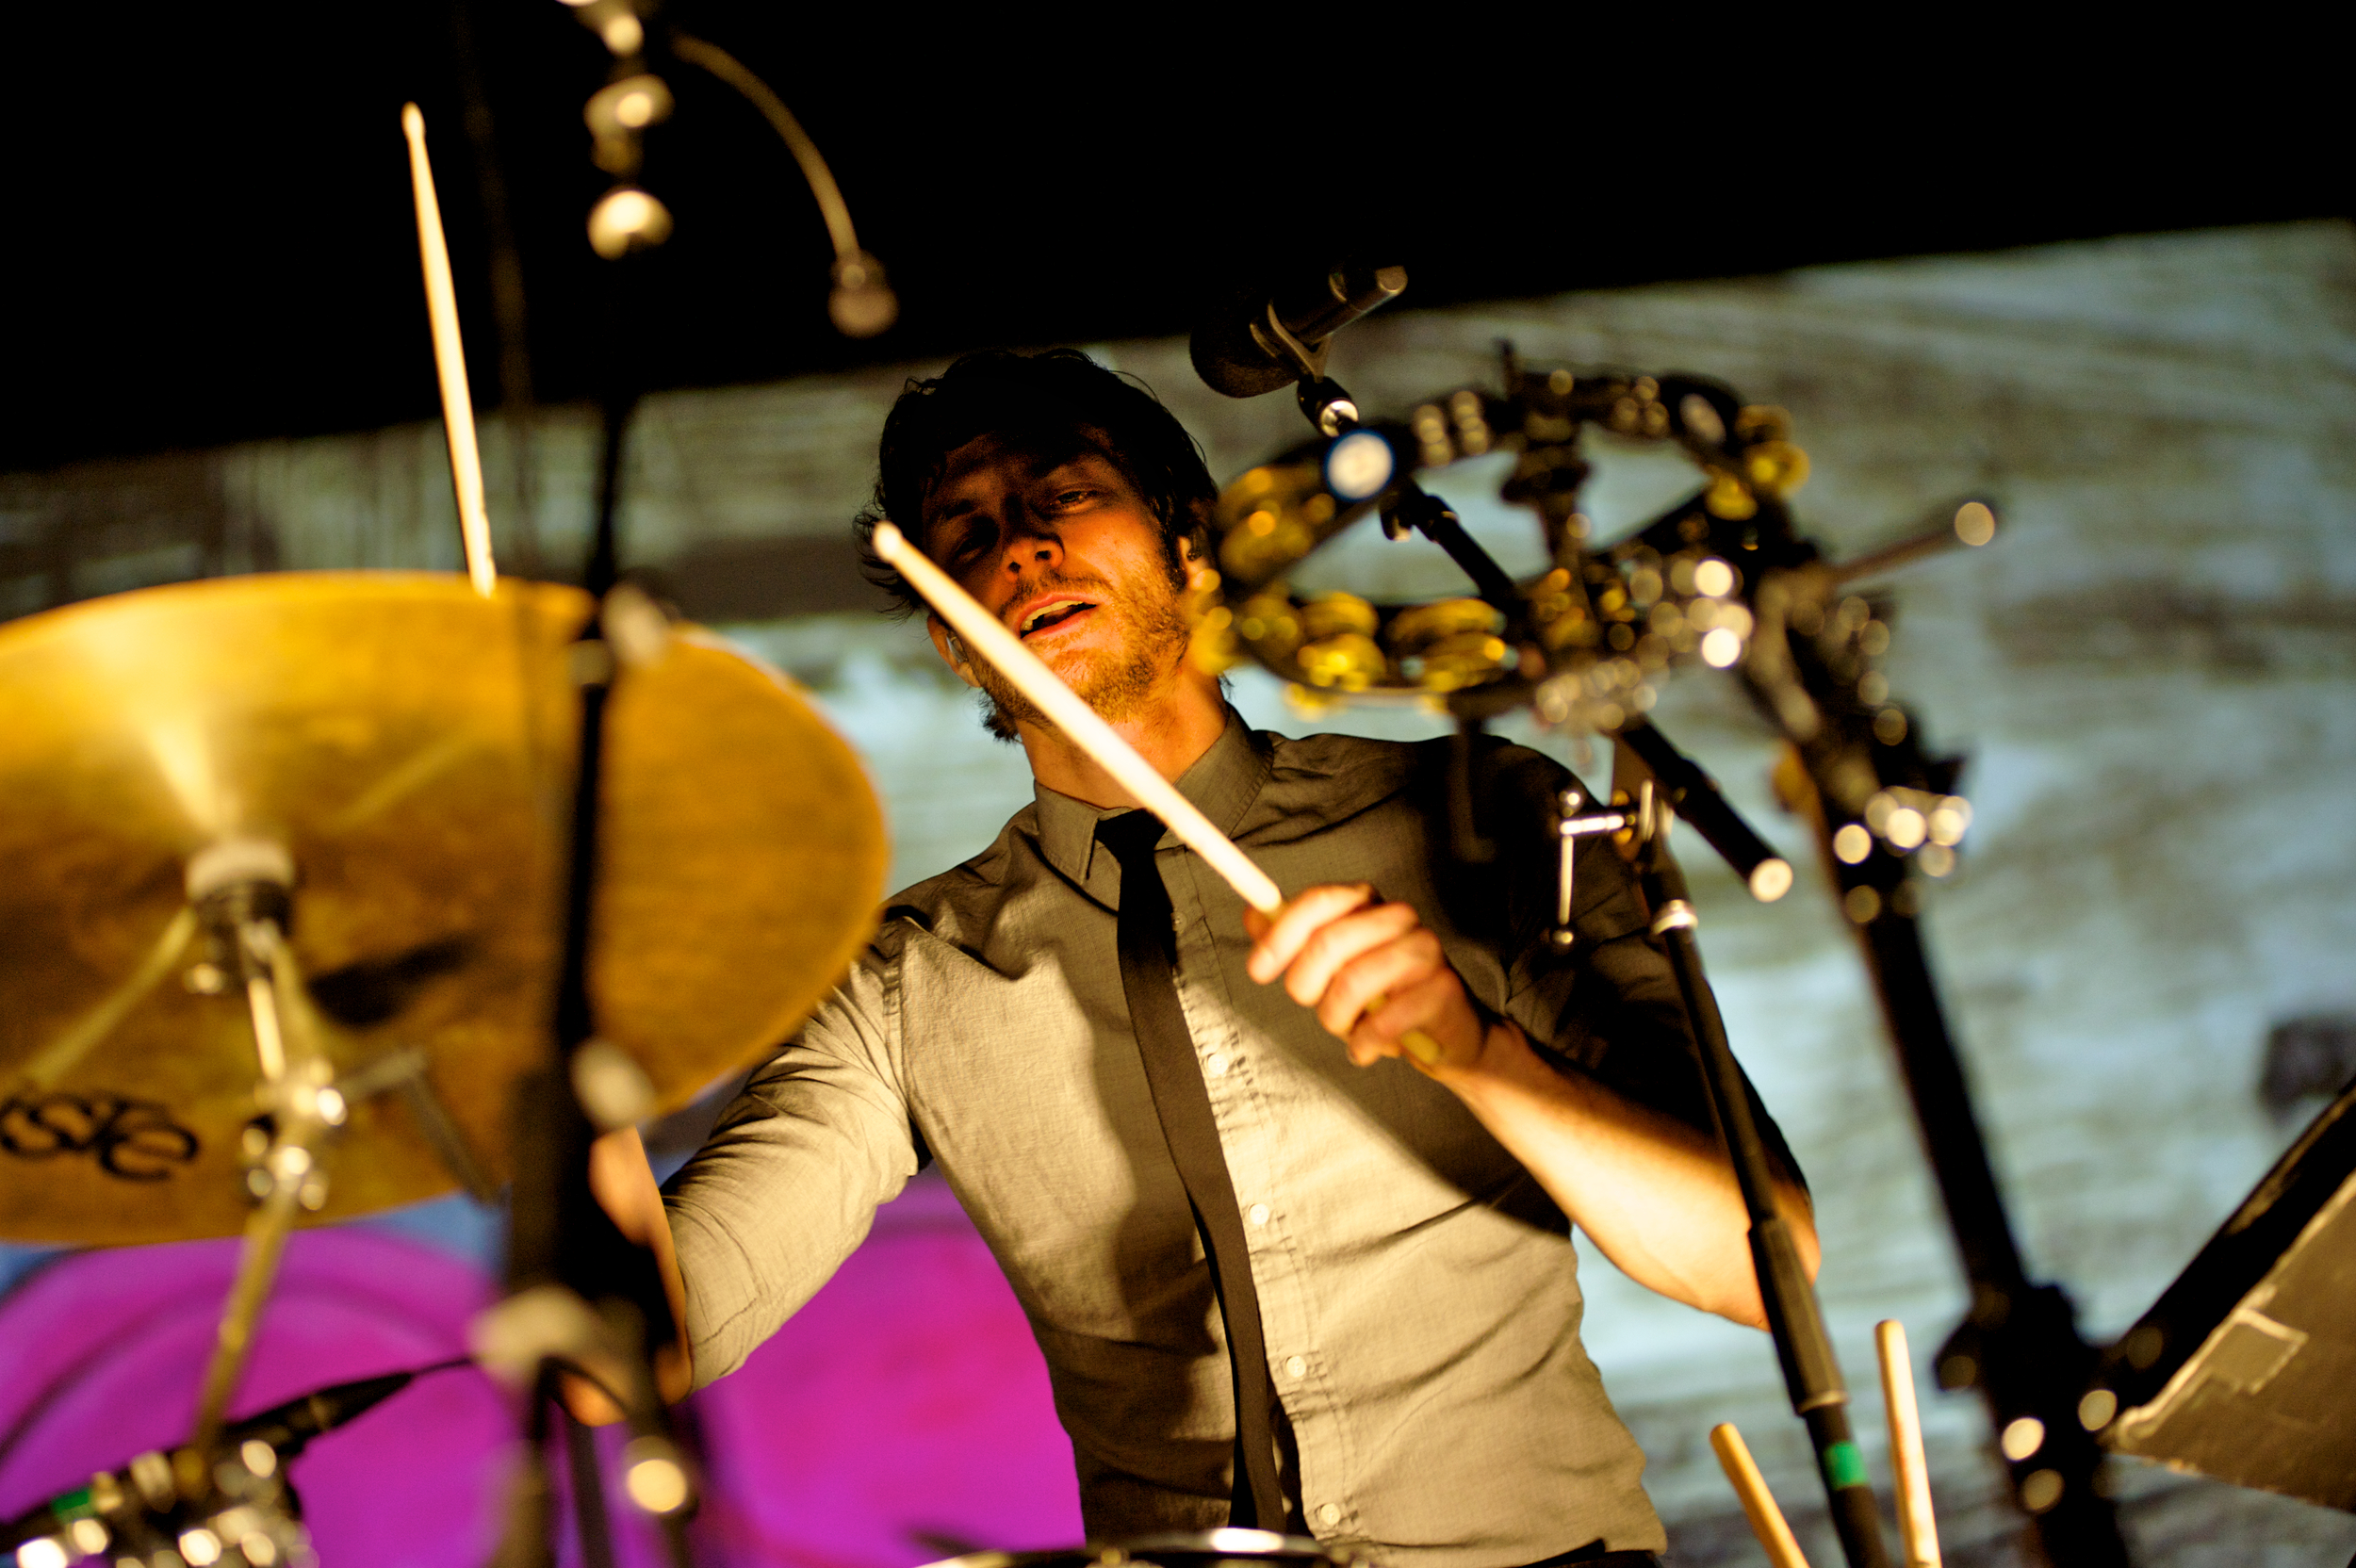   Belgium-Australian multi-instrumental musician and singer-songwriter Gotye performs at the Merriweather Post Pavilion in Columbia, MD.(Photo by Marlon Correa/The Washington Post)  